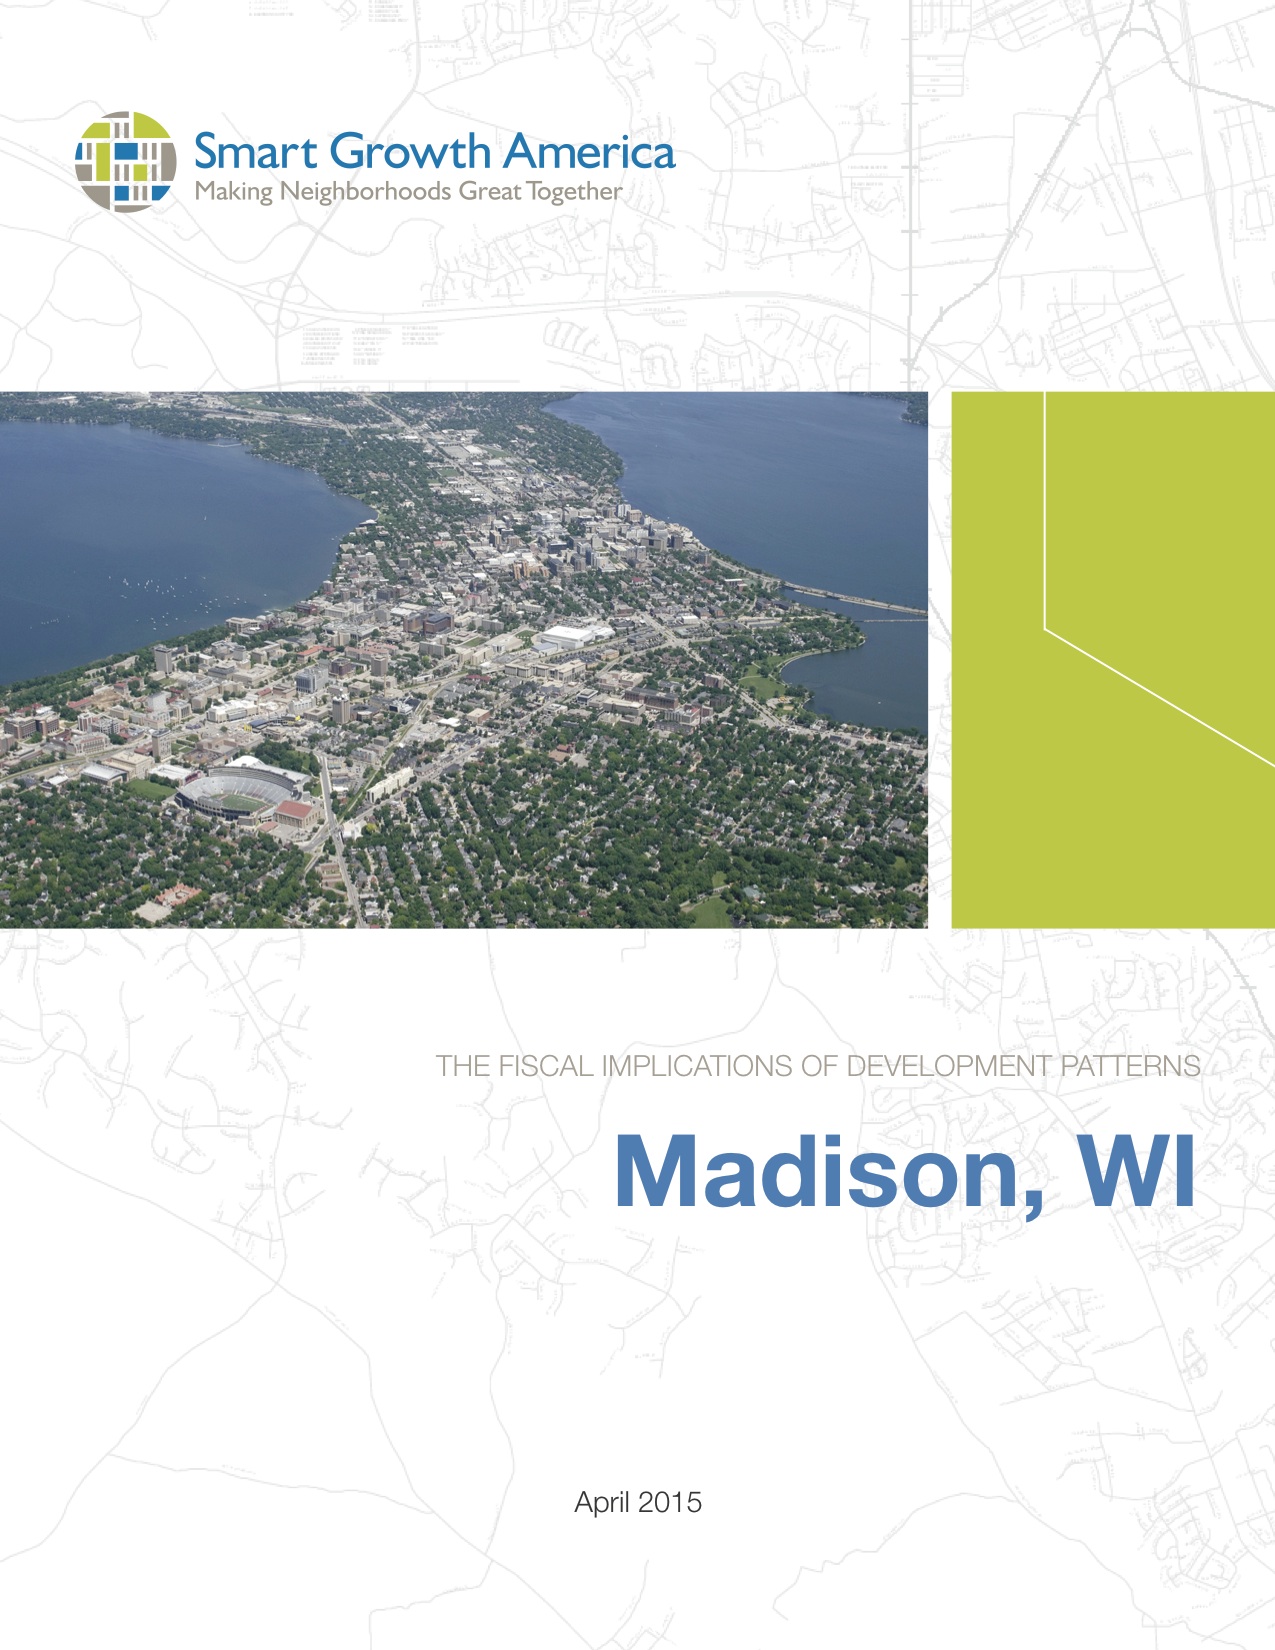 The Fiscal Implications: Madison, WI